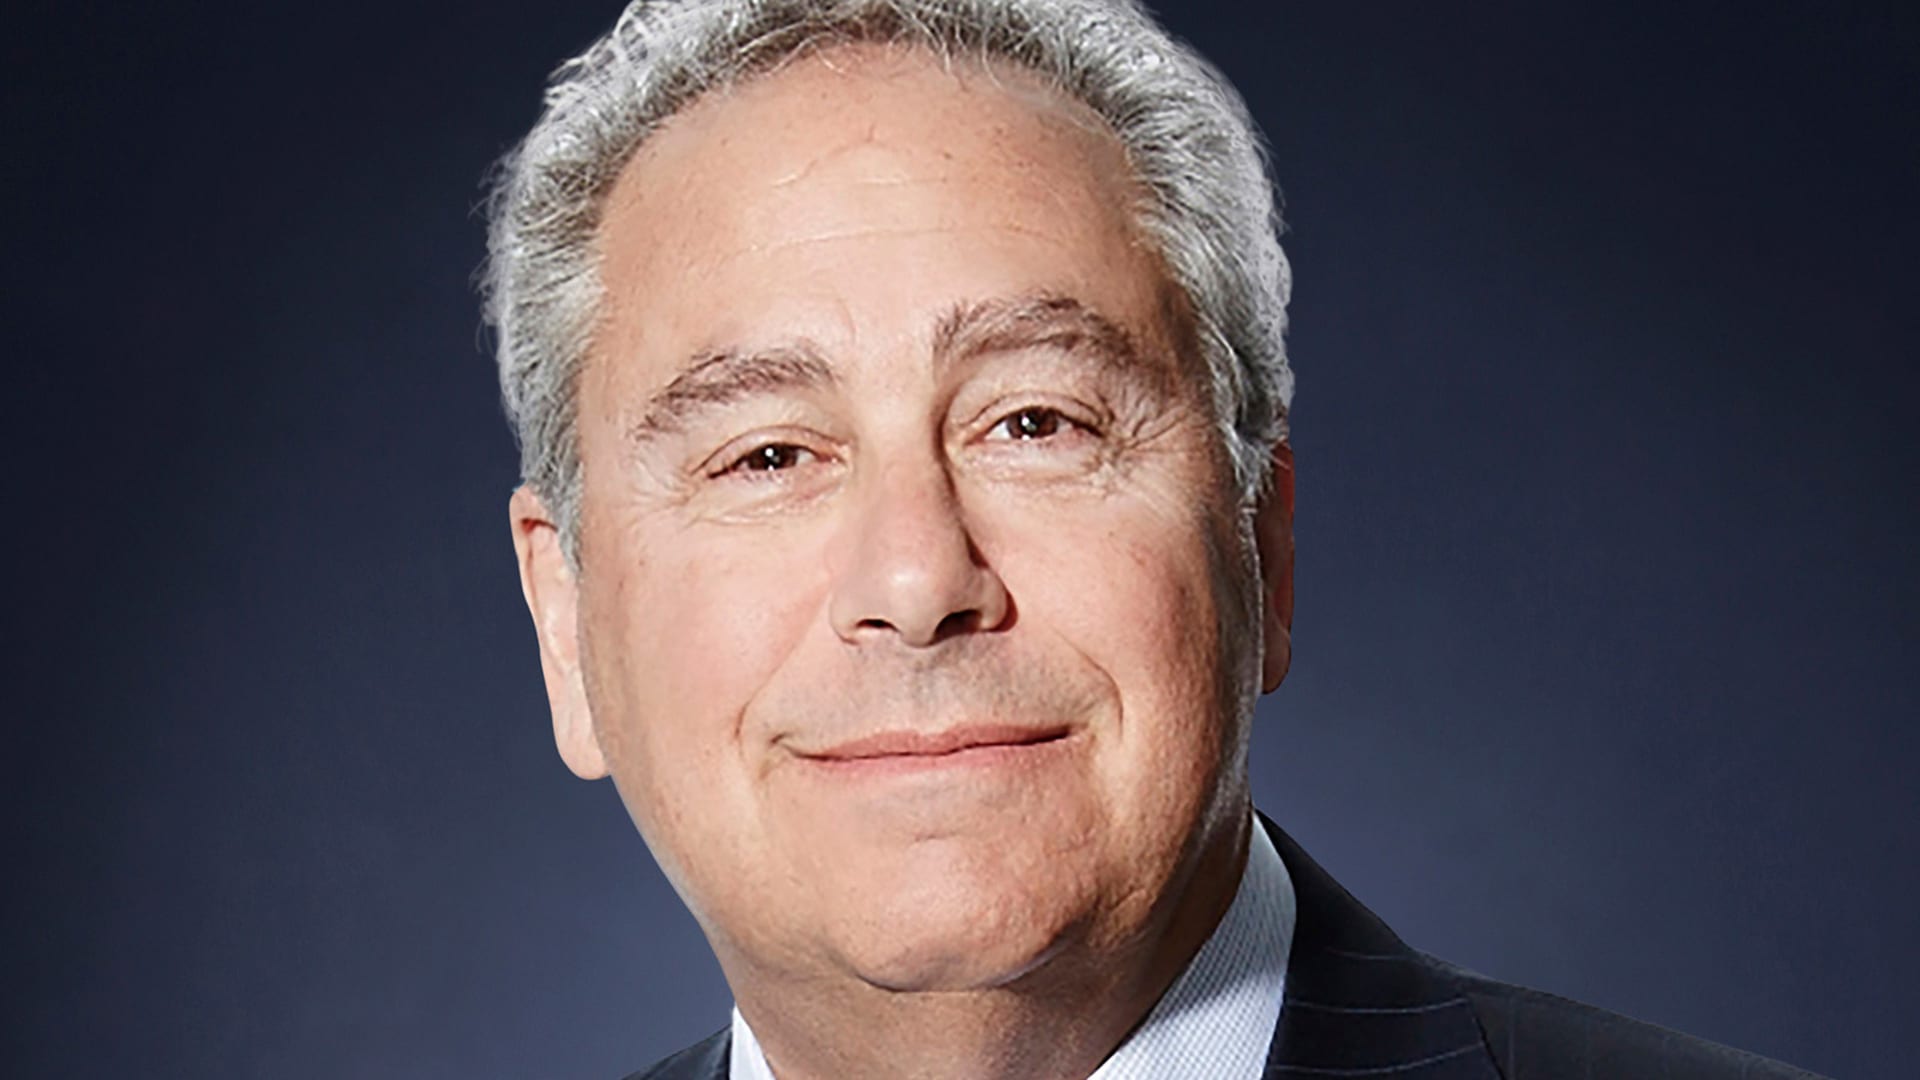 CNBC Chairman Mark Hoffman to step down in September